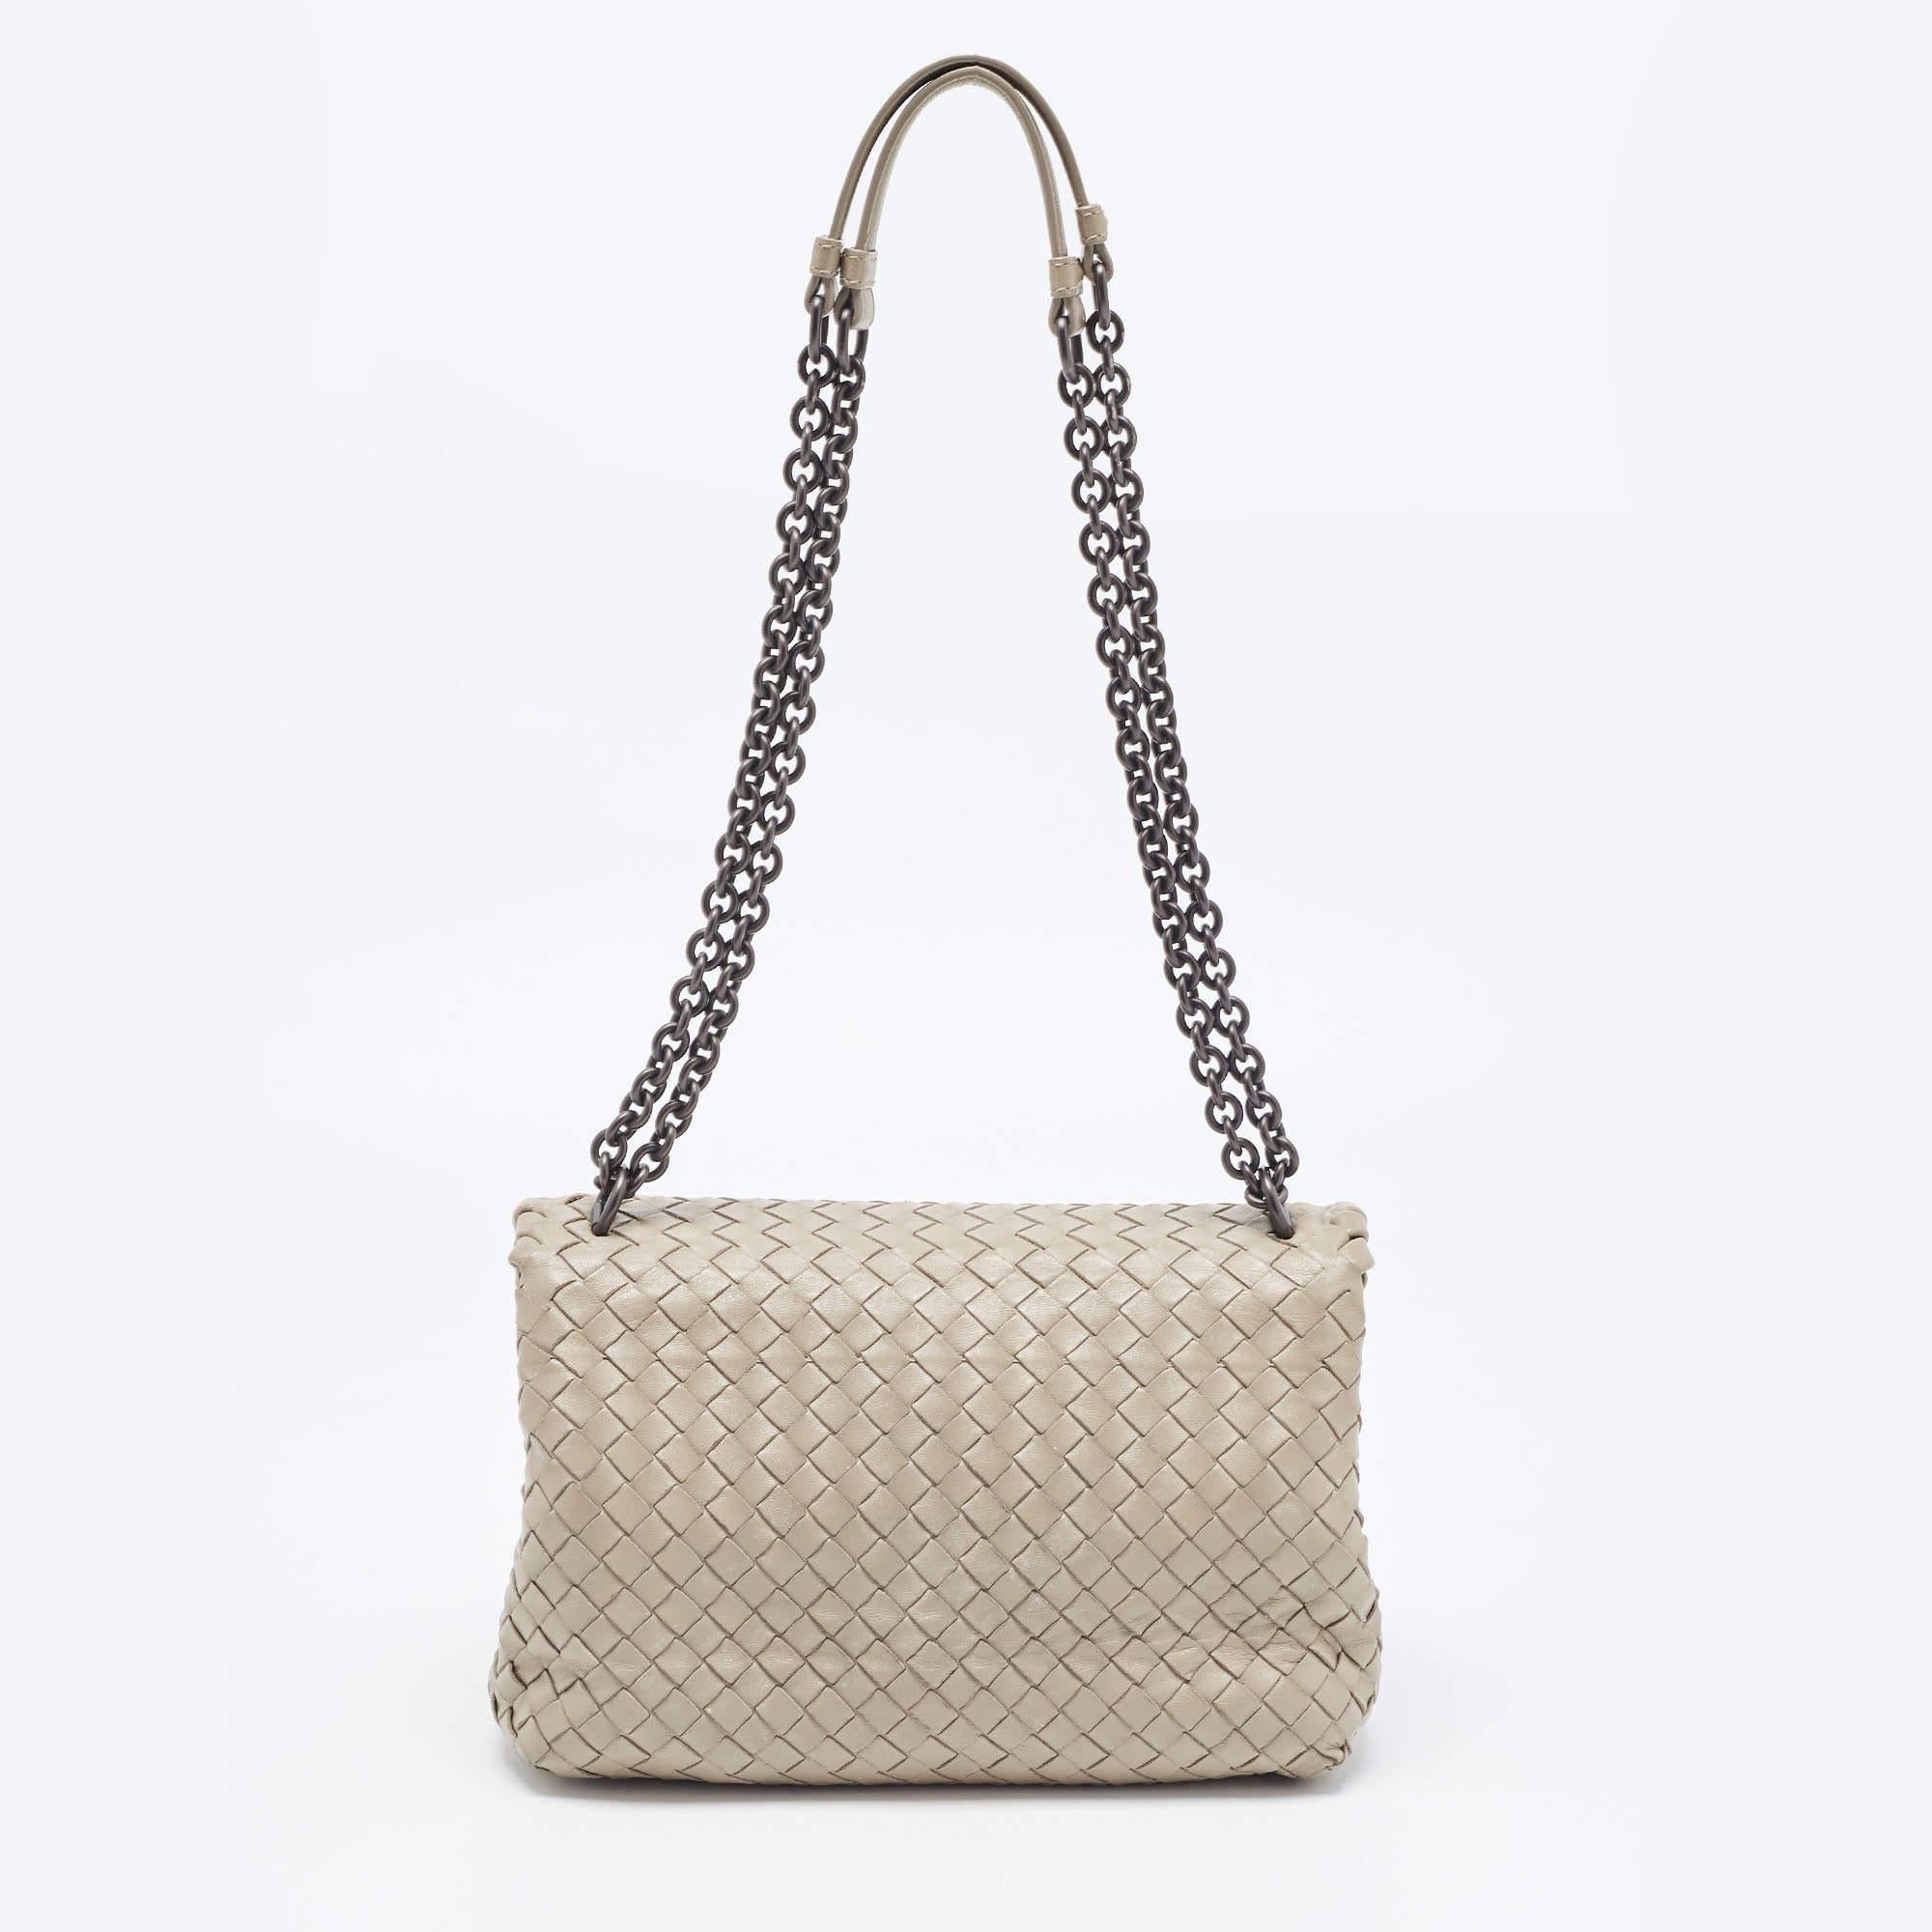 This Bottega Veneta handbag is a must-have item in your collection. Crafted in quality leather, this signature woven bag makes a stunning addition to any modern-day edit. The suede lining on the inside of the bag is well-fitted. Simple and classy,